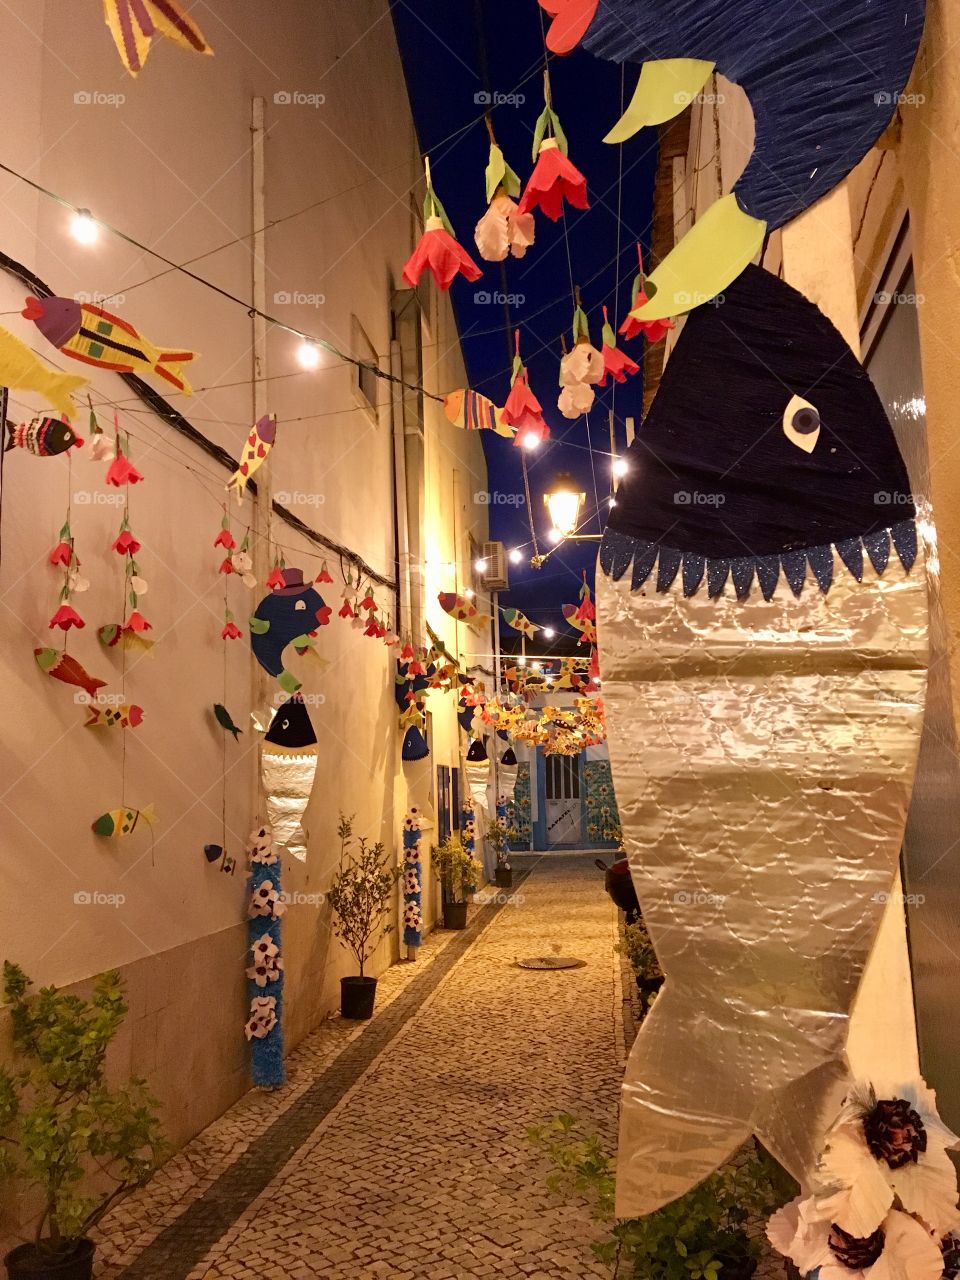 Street Decoration, Art and Feast 